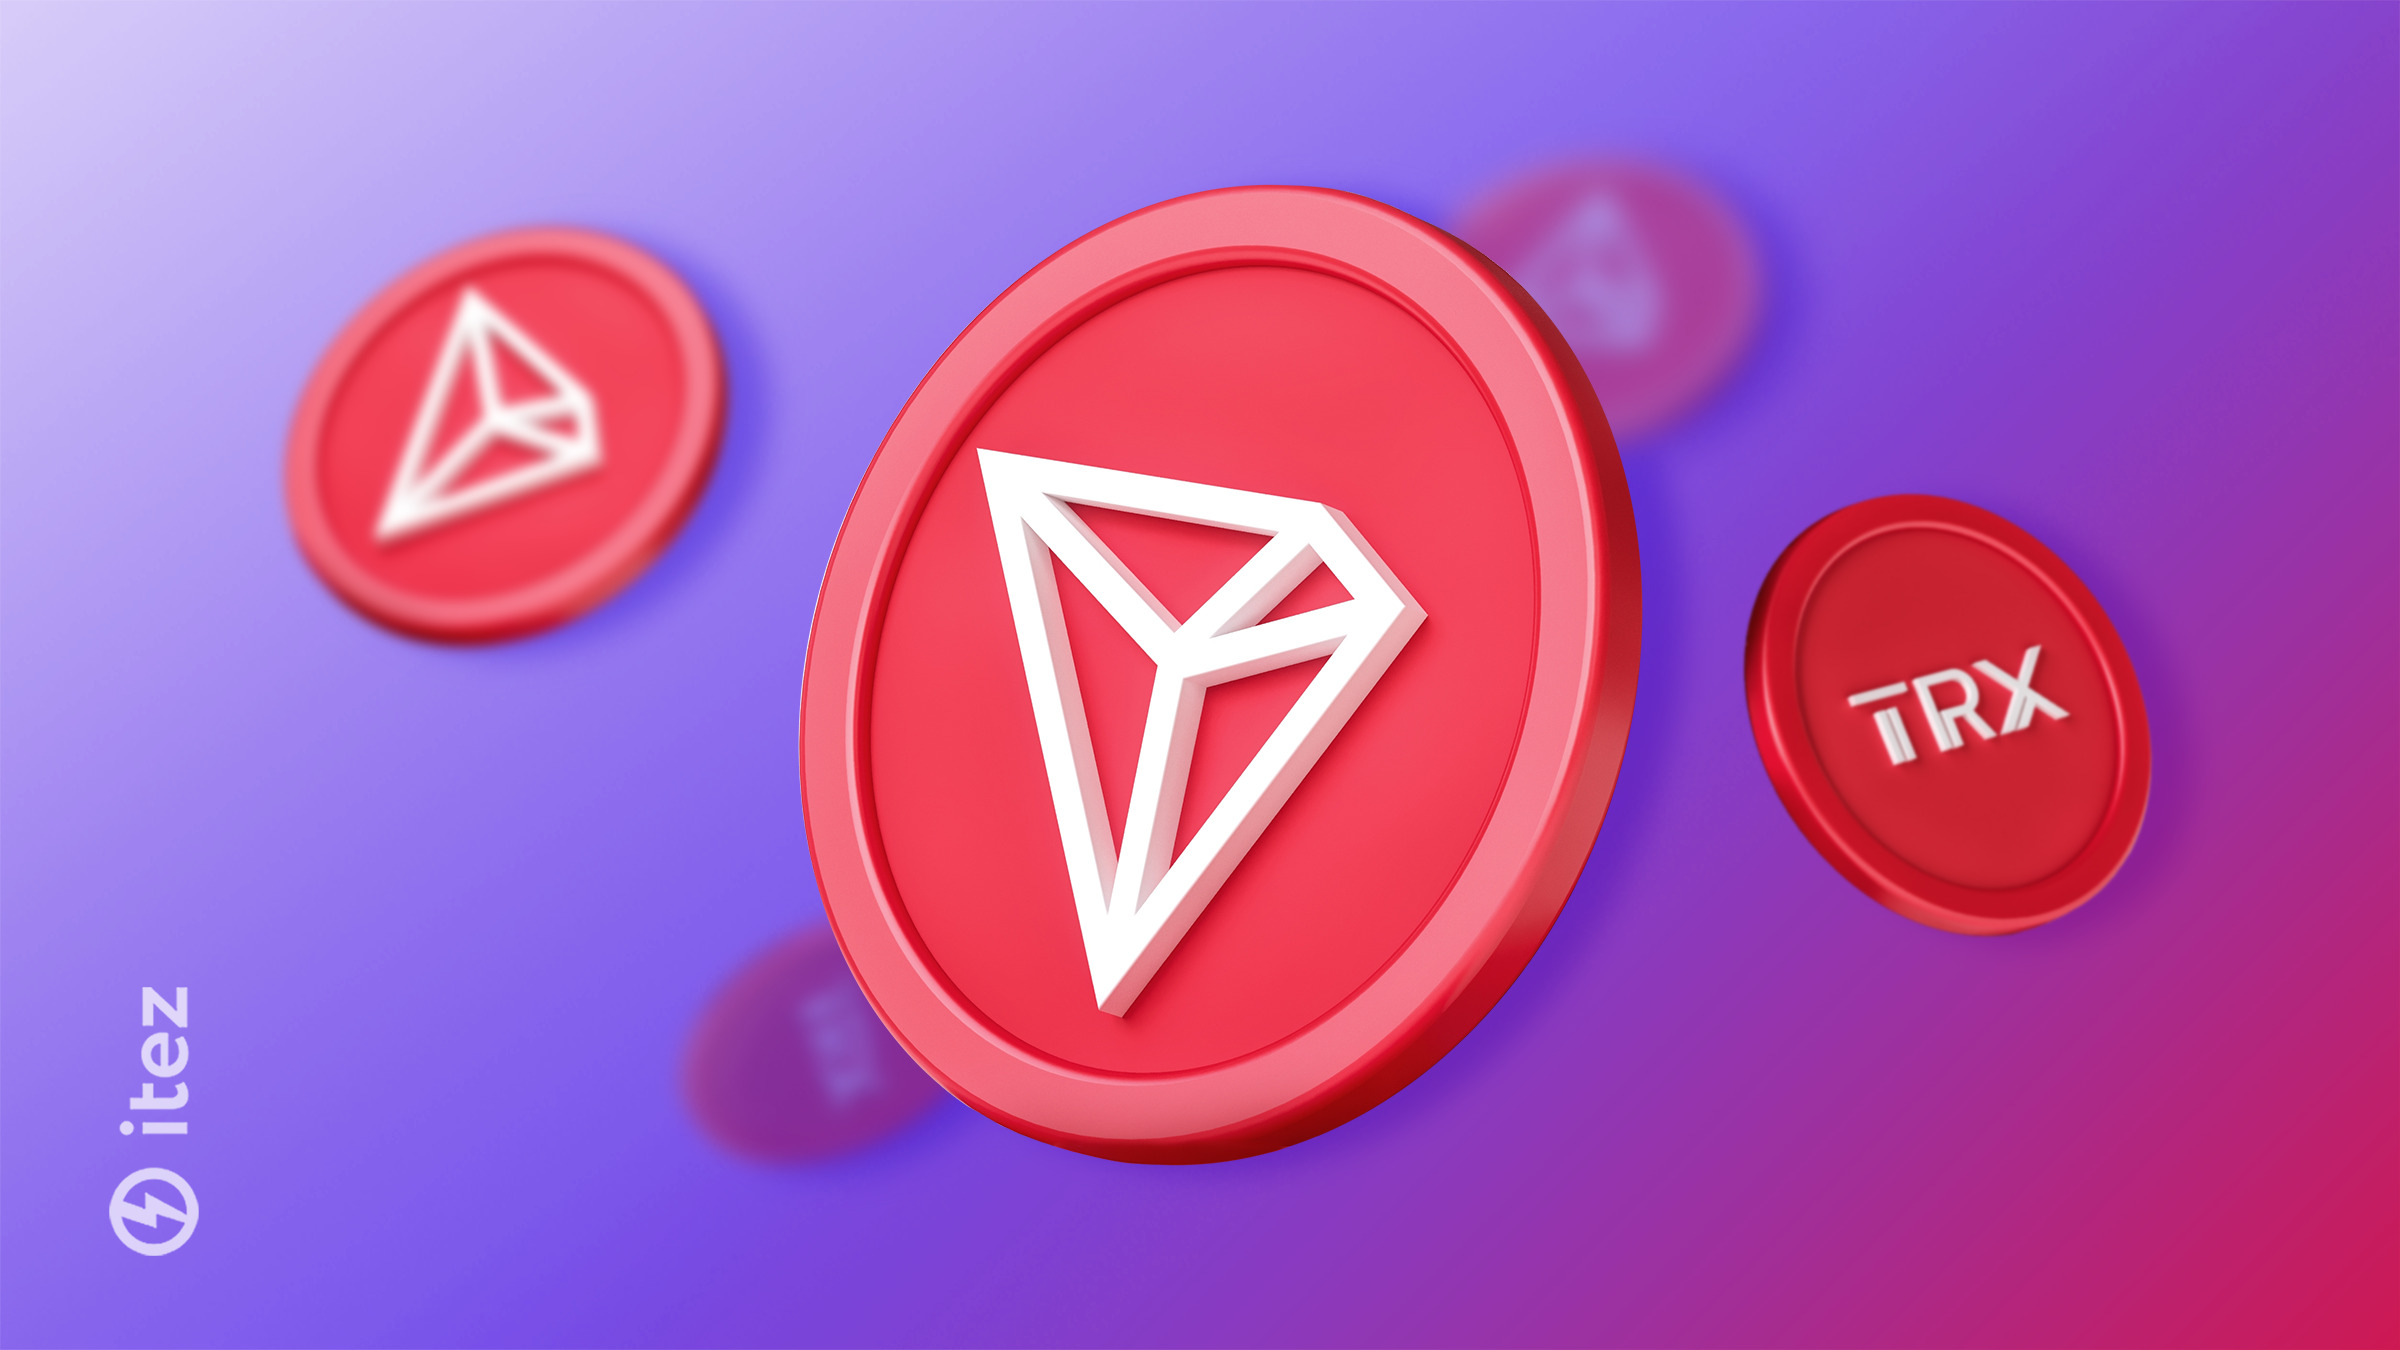 How to create a Tron (TRX) wallet